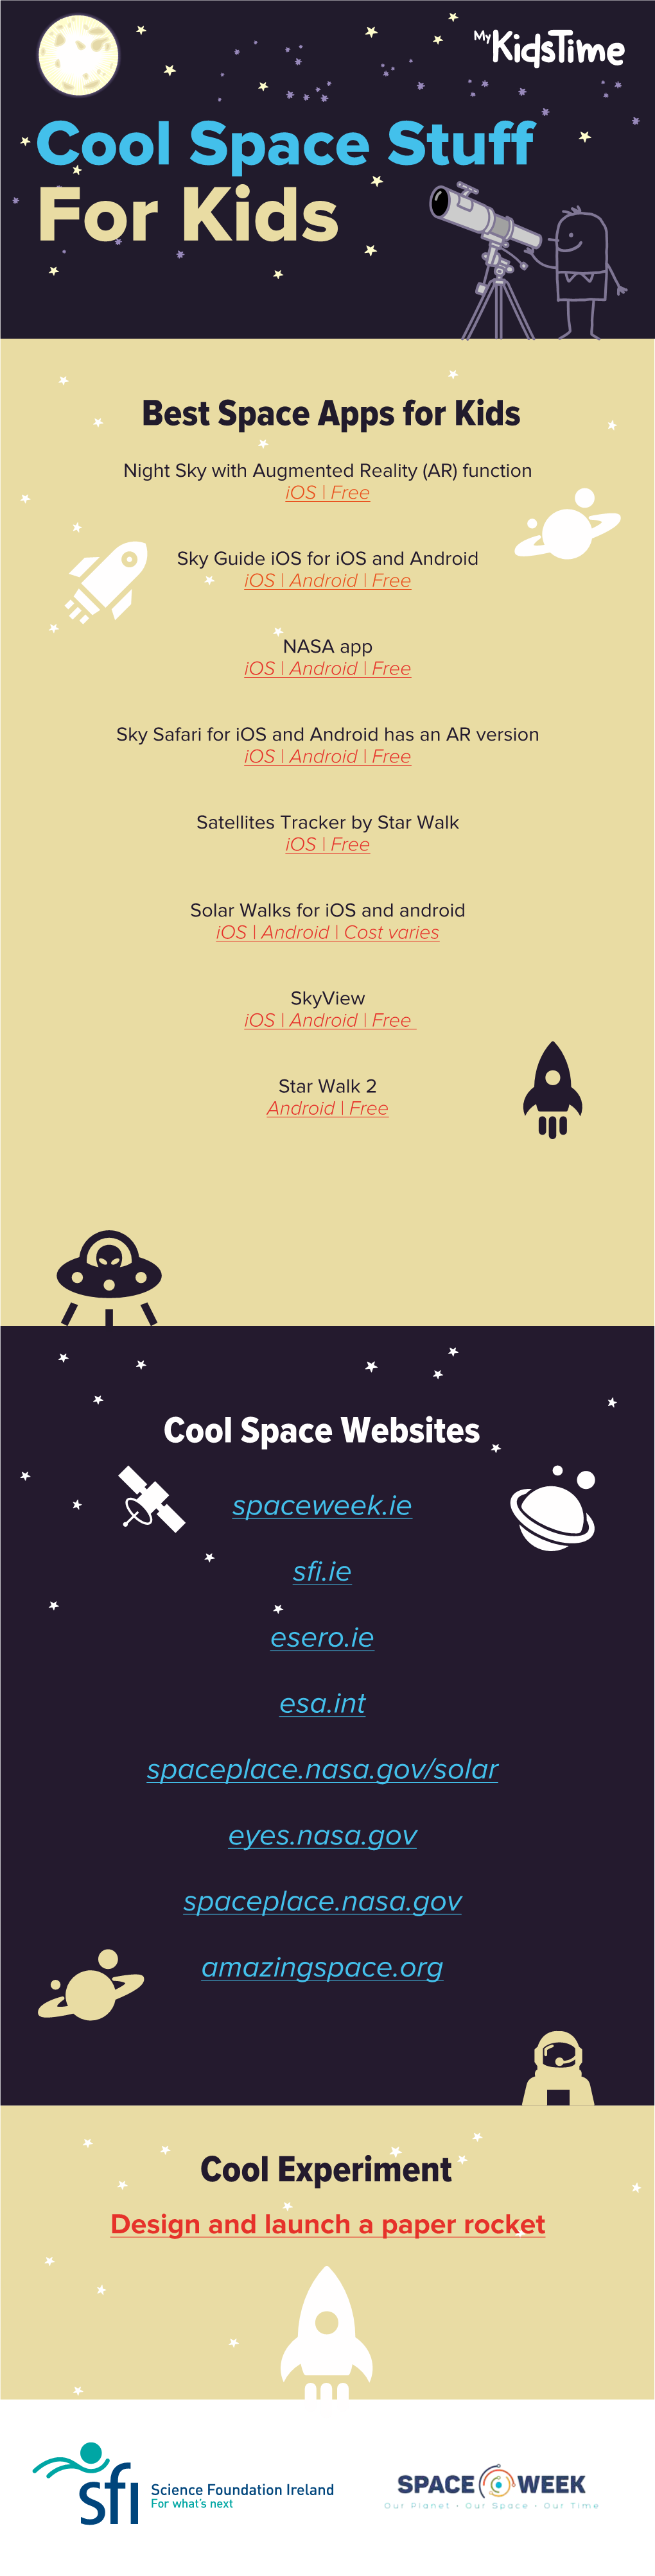 Handy Guide to Space Themed Apps and Websites